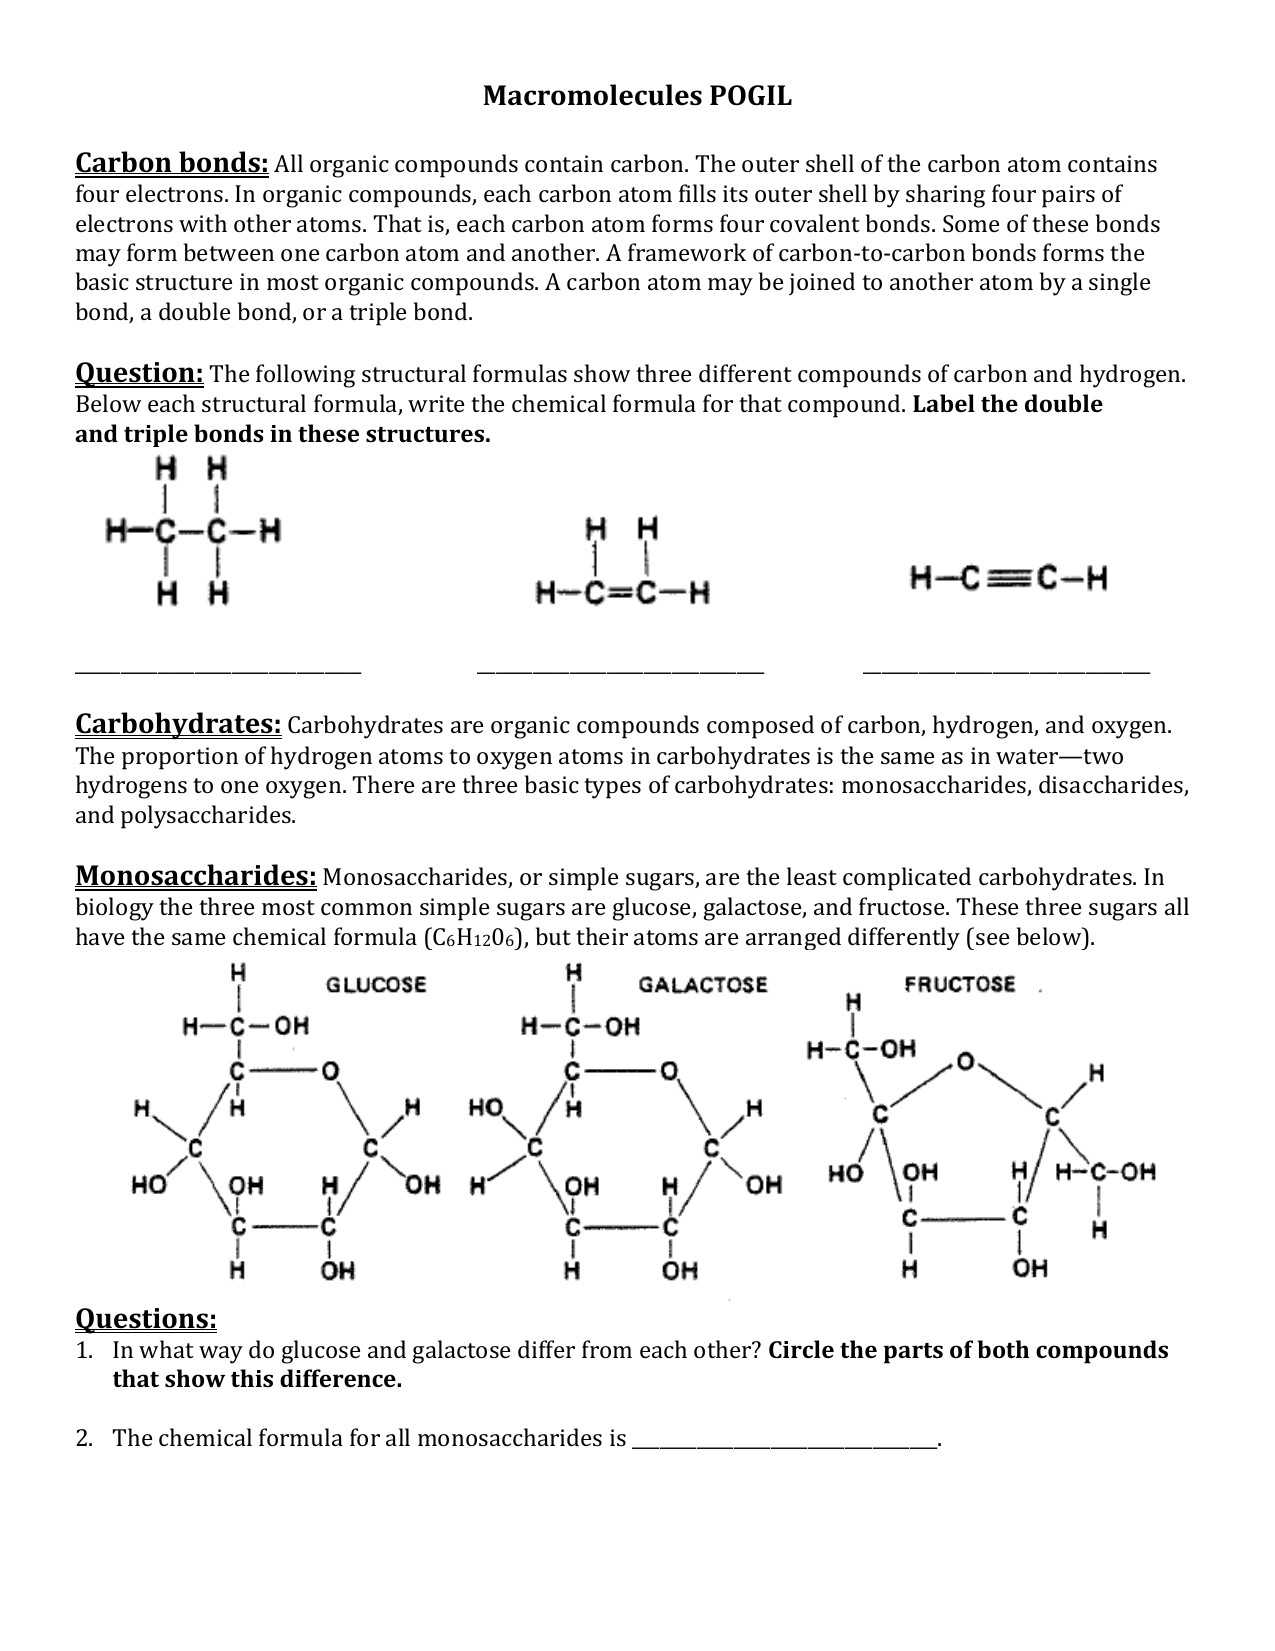 Afterlife the Strange Science Of Decay Worksheet Answer Key together with Introduction to Biotechnology Worksheet Answers Luxury Mutations